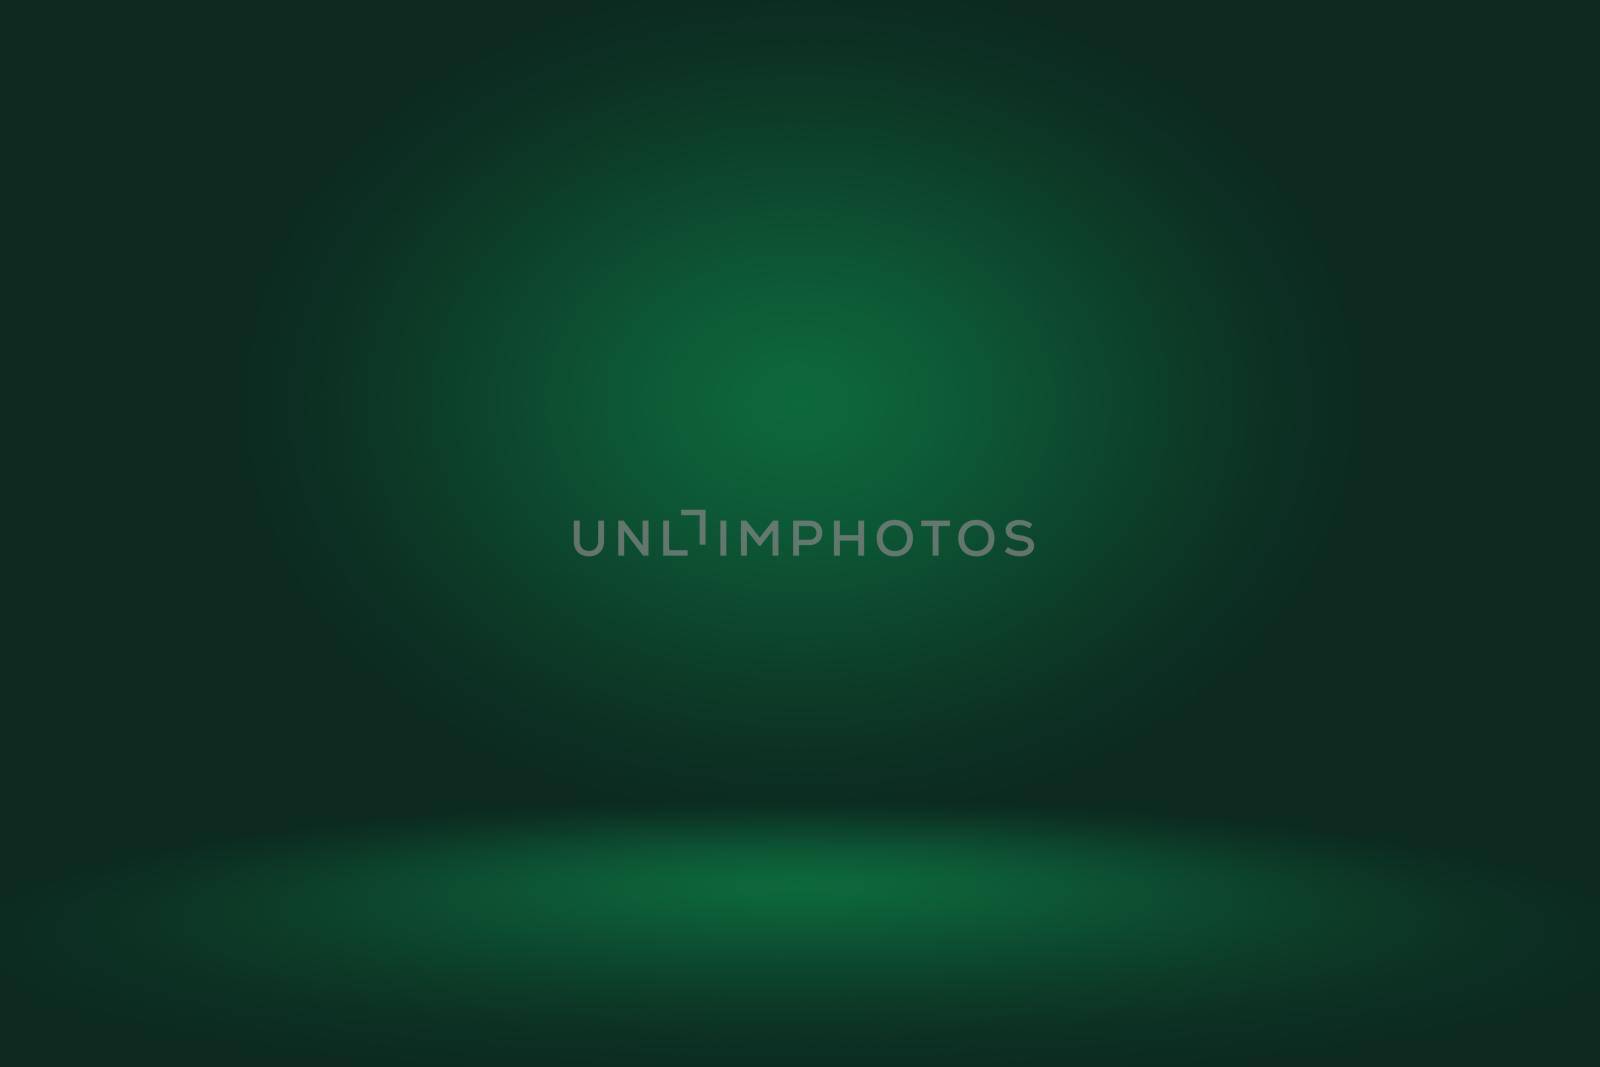 Empty Green Studio well use as background,website template,frame,business report.